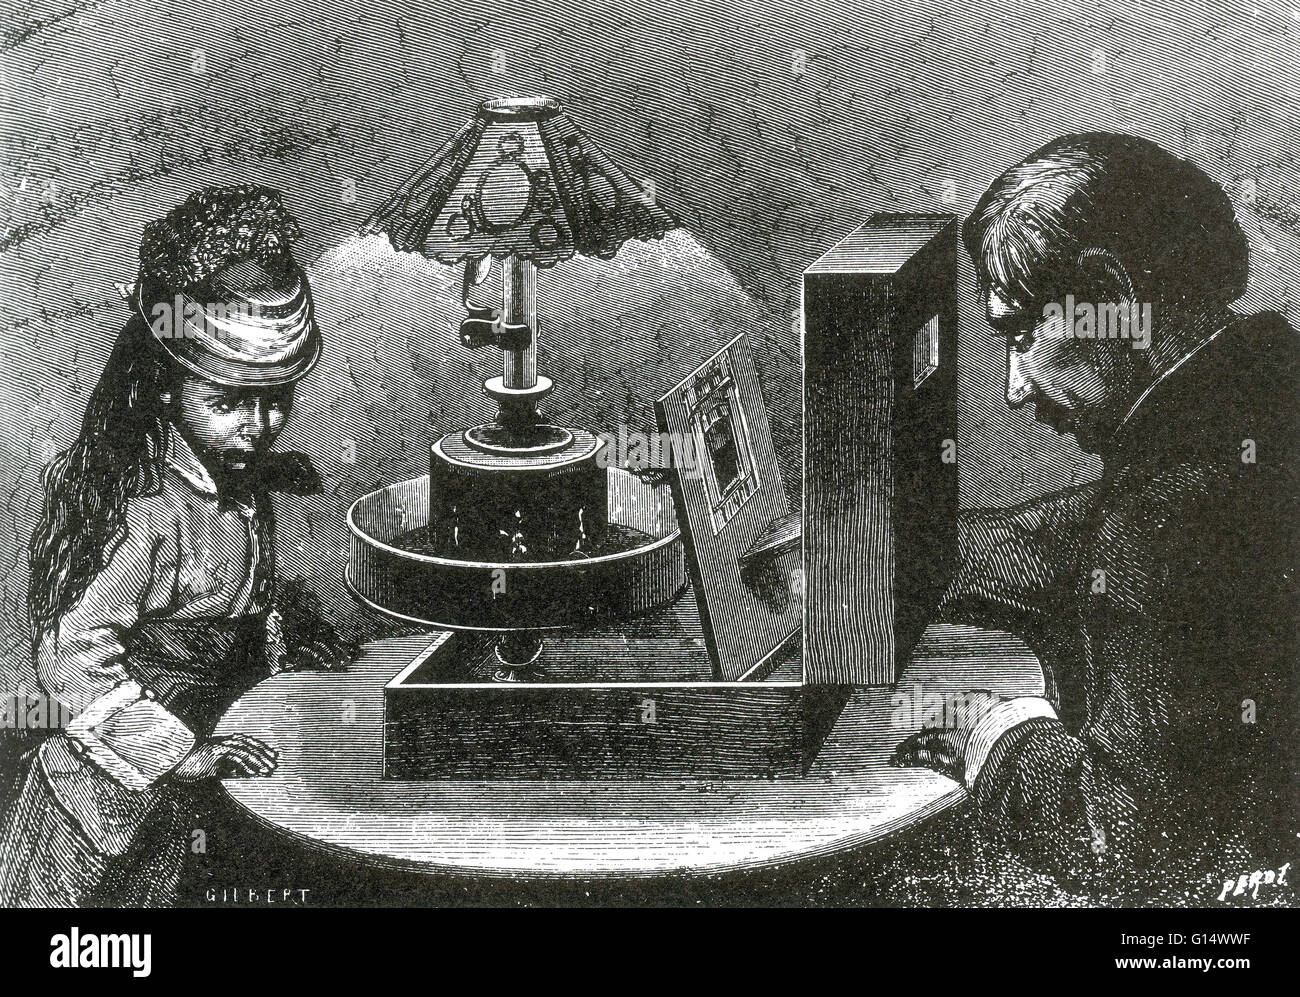 The praxinoscope was an animation device, the successor to the zoetrope. It was invented in France in 1877 by Charles-Émile Reynaud. Like the zoetrope, it used a strip of pictures placed around the inner surface of a spinning cylinder. The praxinoscope im Stock Photo